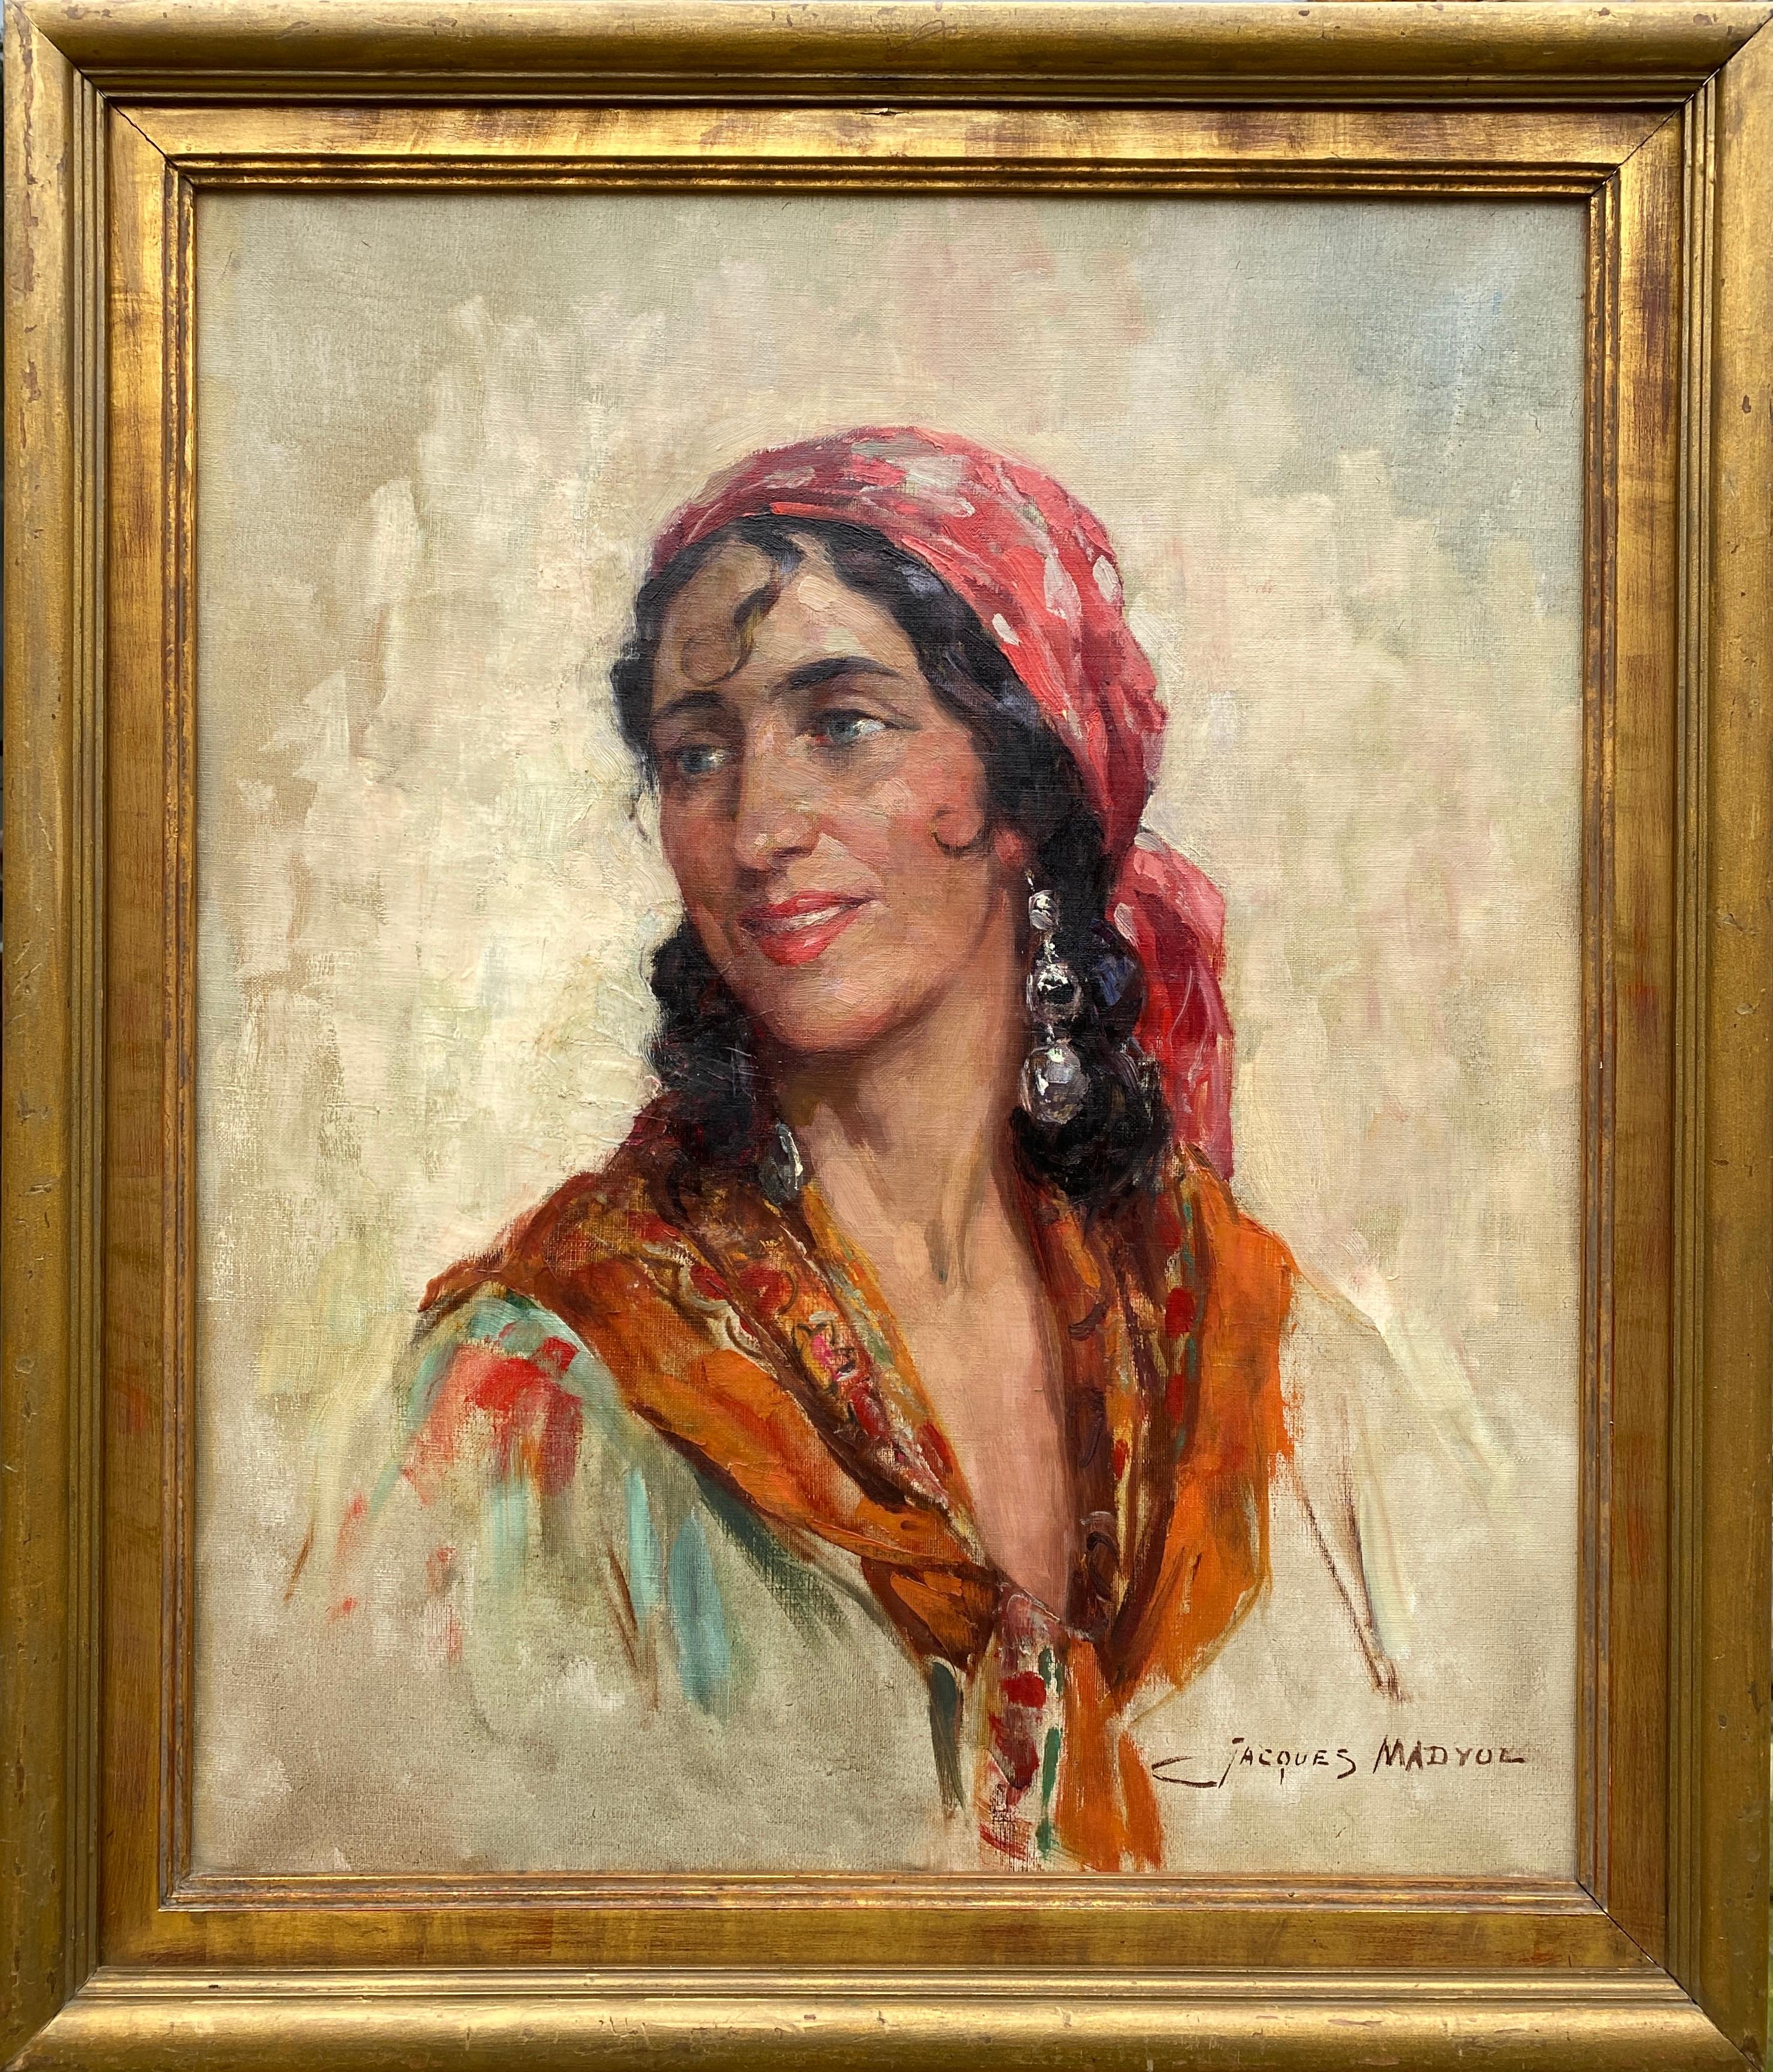 Madyol Jacques
Brussels 1871 – 1950
Belgian Painter

A Gypsy Lady
Signature: Signed bottom right, verso signed Jacques Madyol, titled "Gitane" and placed Studio 5 Rue Gachard, Bruxelles
Medium: Oil on canvas
Dimensions: Image size 46 x 54,50 cm,